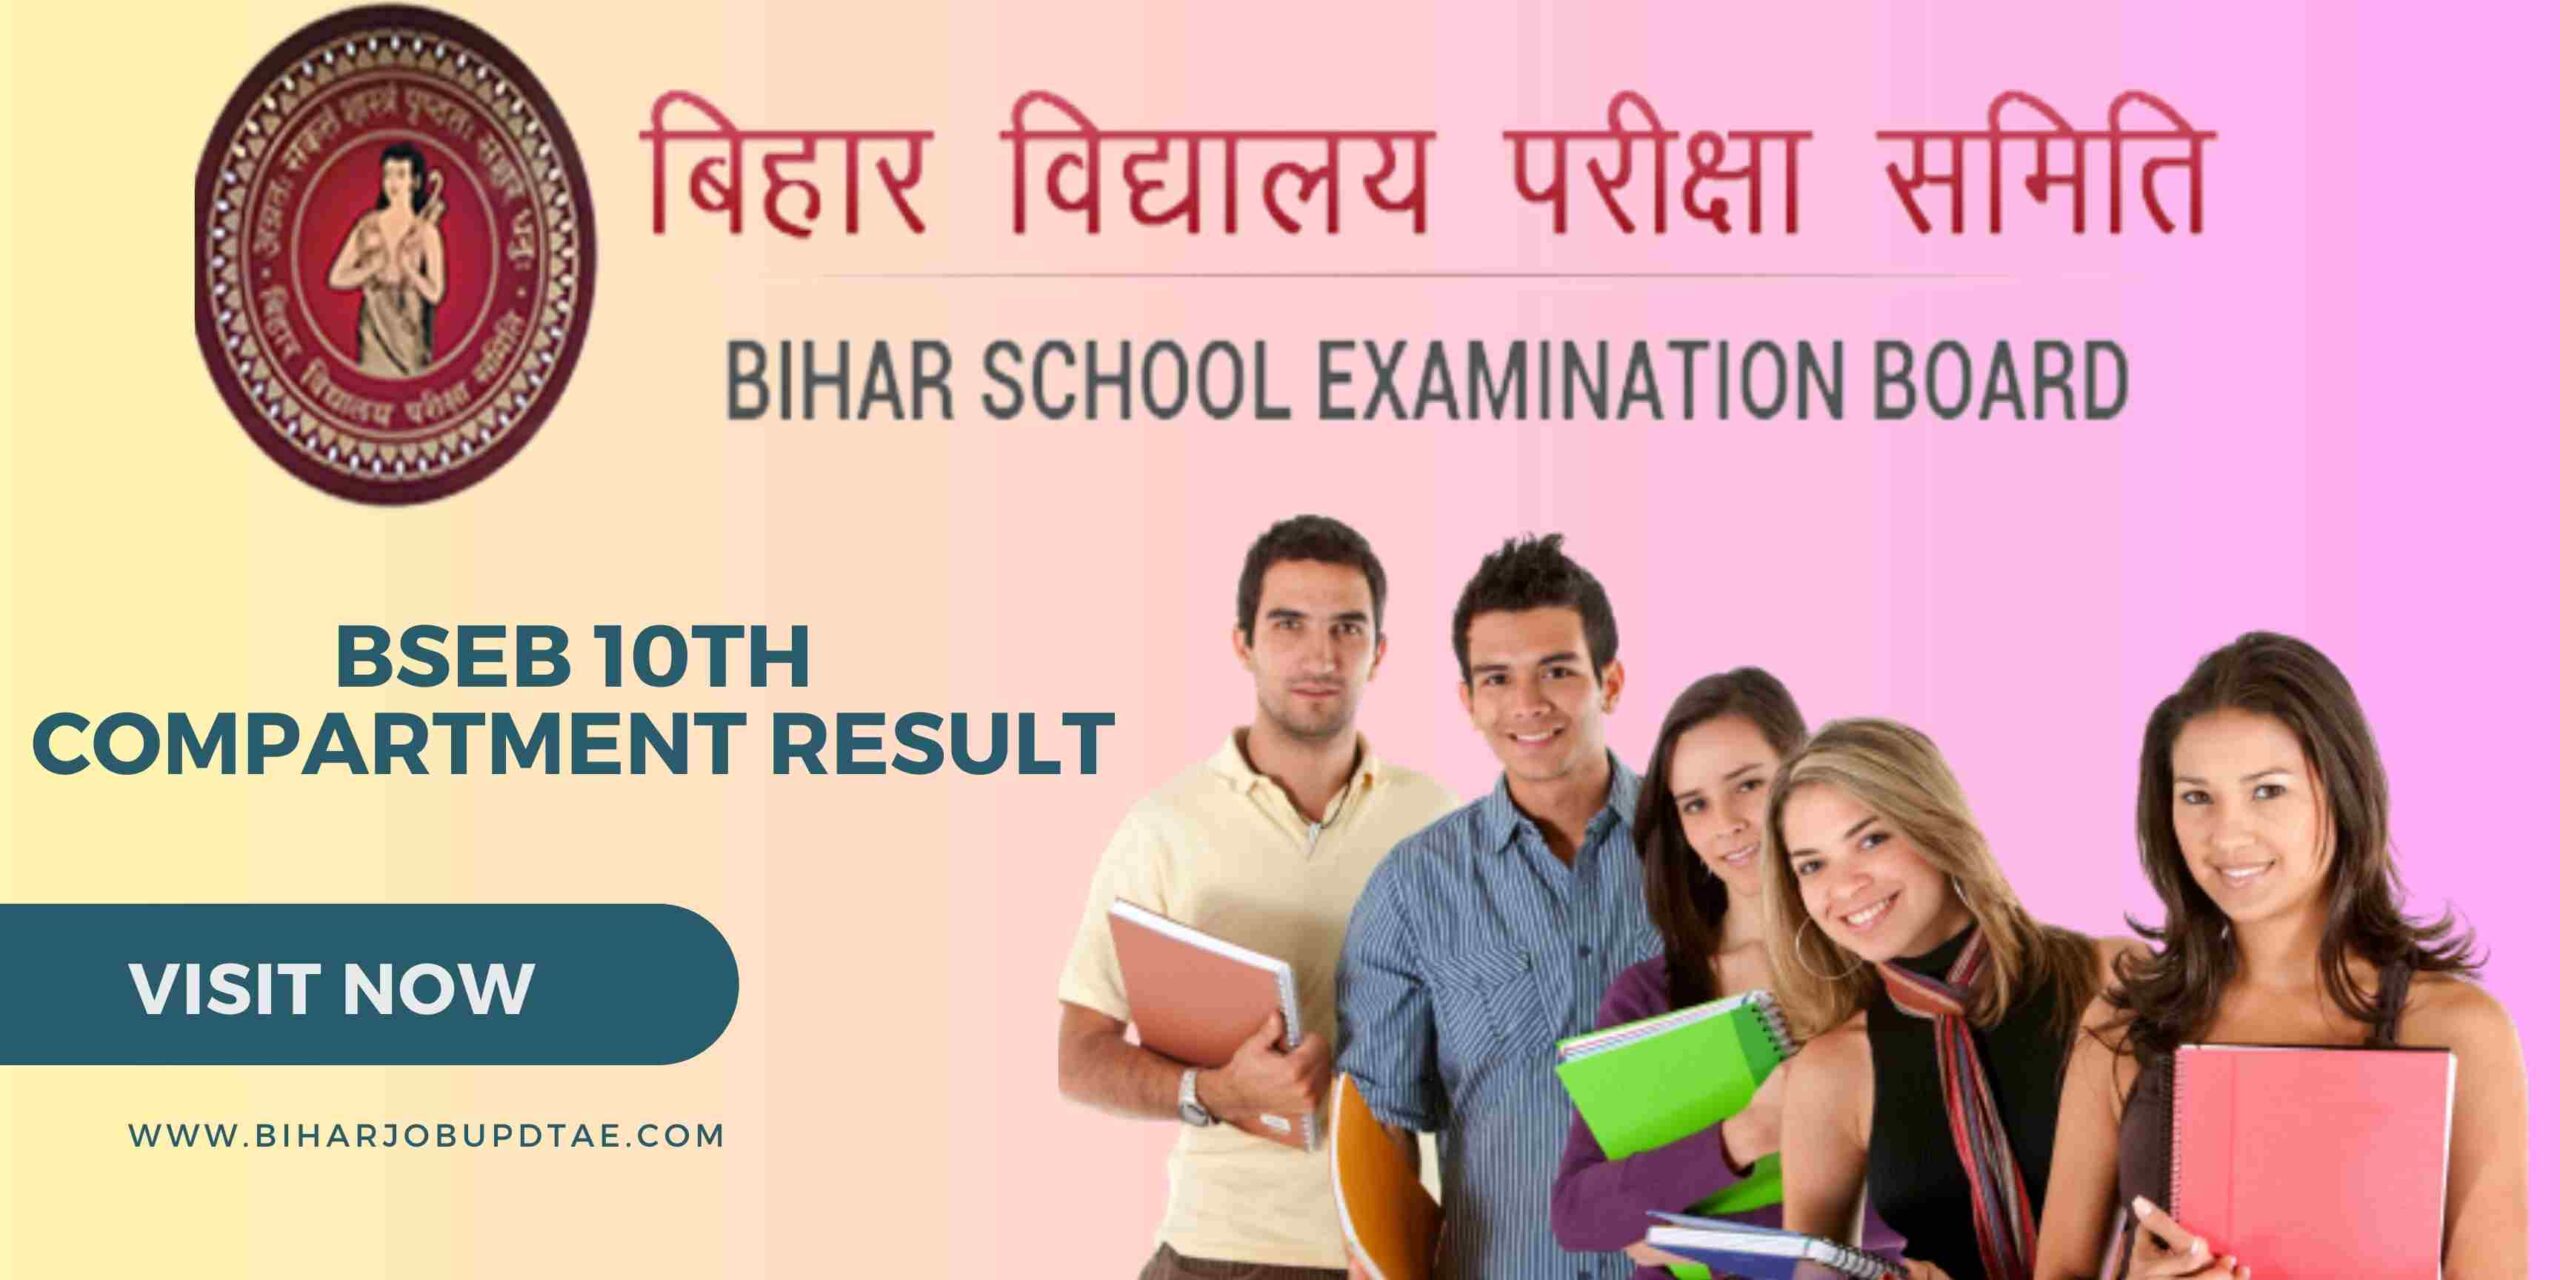 BSEB 10th Compartment Result